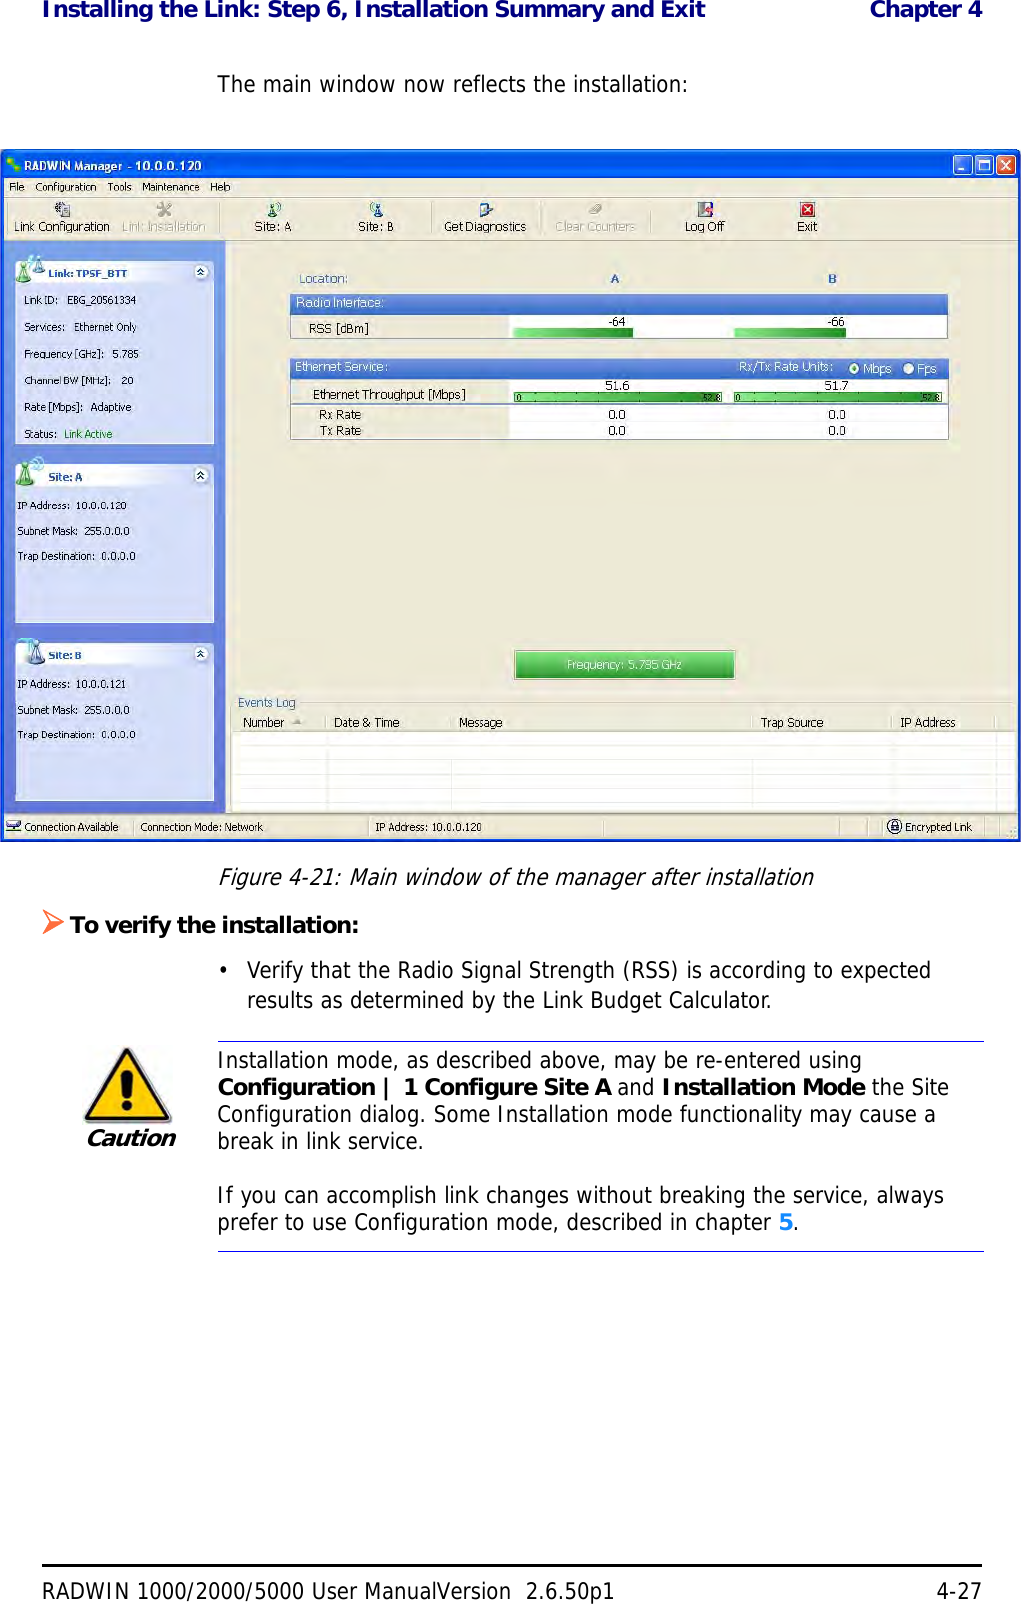 Installing the Link: Step 6, Installation Summary and Exit  Chapter 4RADWIN 1000/2000/5000 User ManualVersion  2.6.50p1 4-27The main window now reflects the installation:Figure 4-21: Main window of the manager after installation To verify the installation:• Verify that the Radio Signal Strength (RSS) is according to expected results as determined by the Link Budget Calculator.CautionInstallation mode, as described above, may be re-entered using Configuration | 1 Configure Site A and Installation Mode the Site Configuration dialog. Some Installation mode functionality may cause a break in link service.If you can accomplish link changes without breaking the service, always prefer to use Configuration mode, described in chapter 5. 